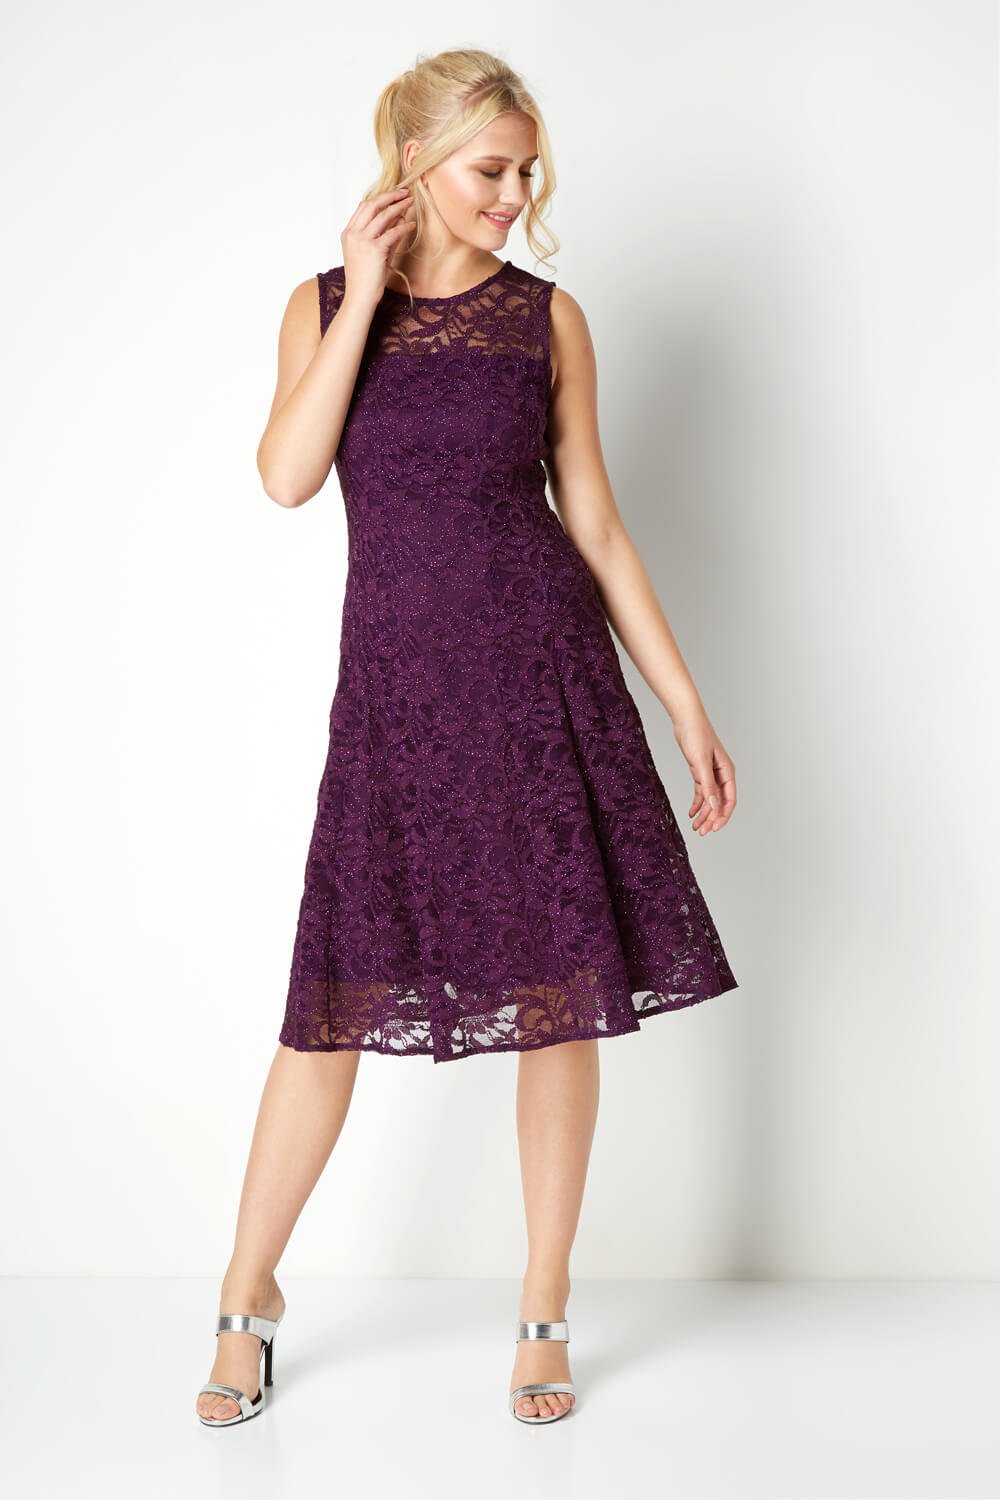 Purple Lace Fit and Flare Dress, Image 1 of 4